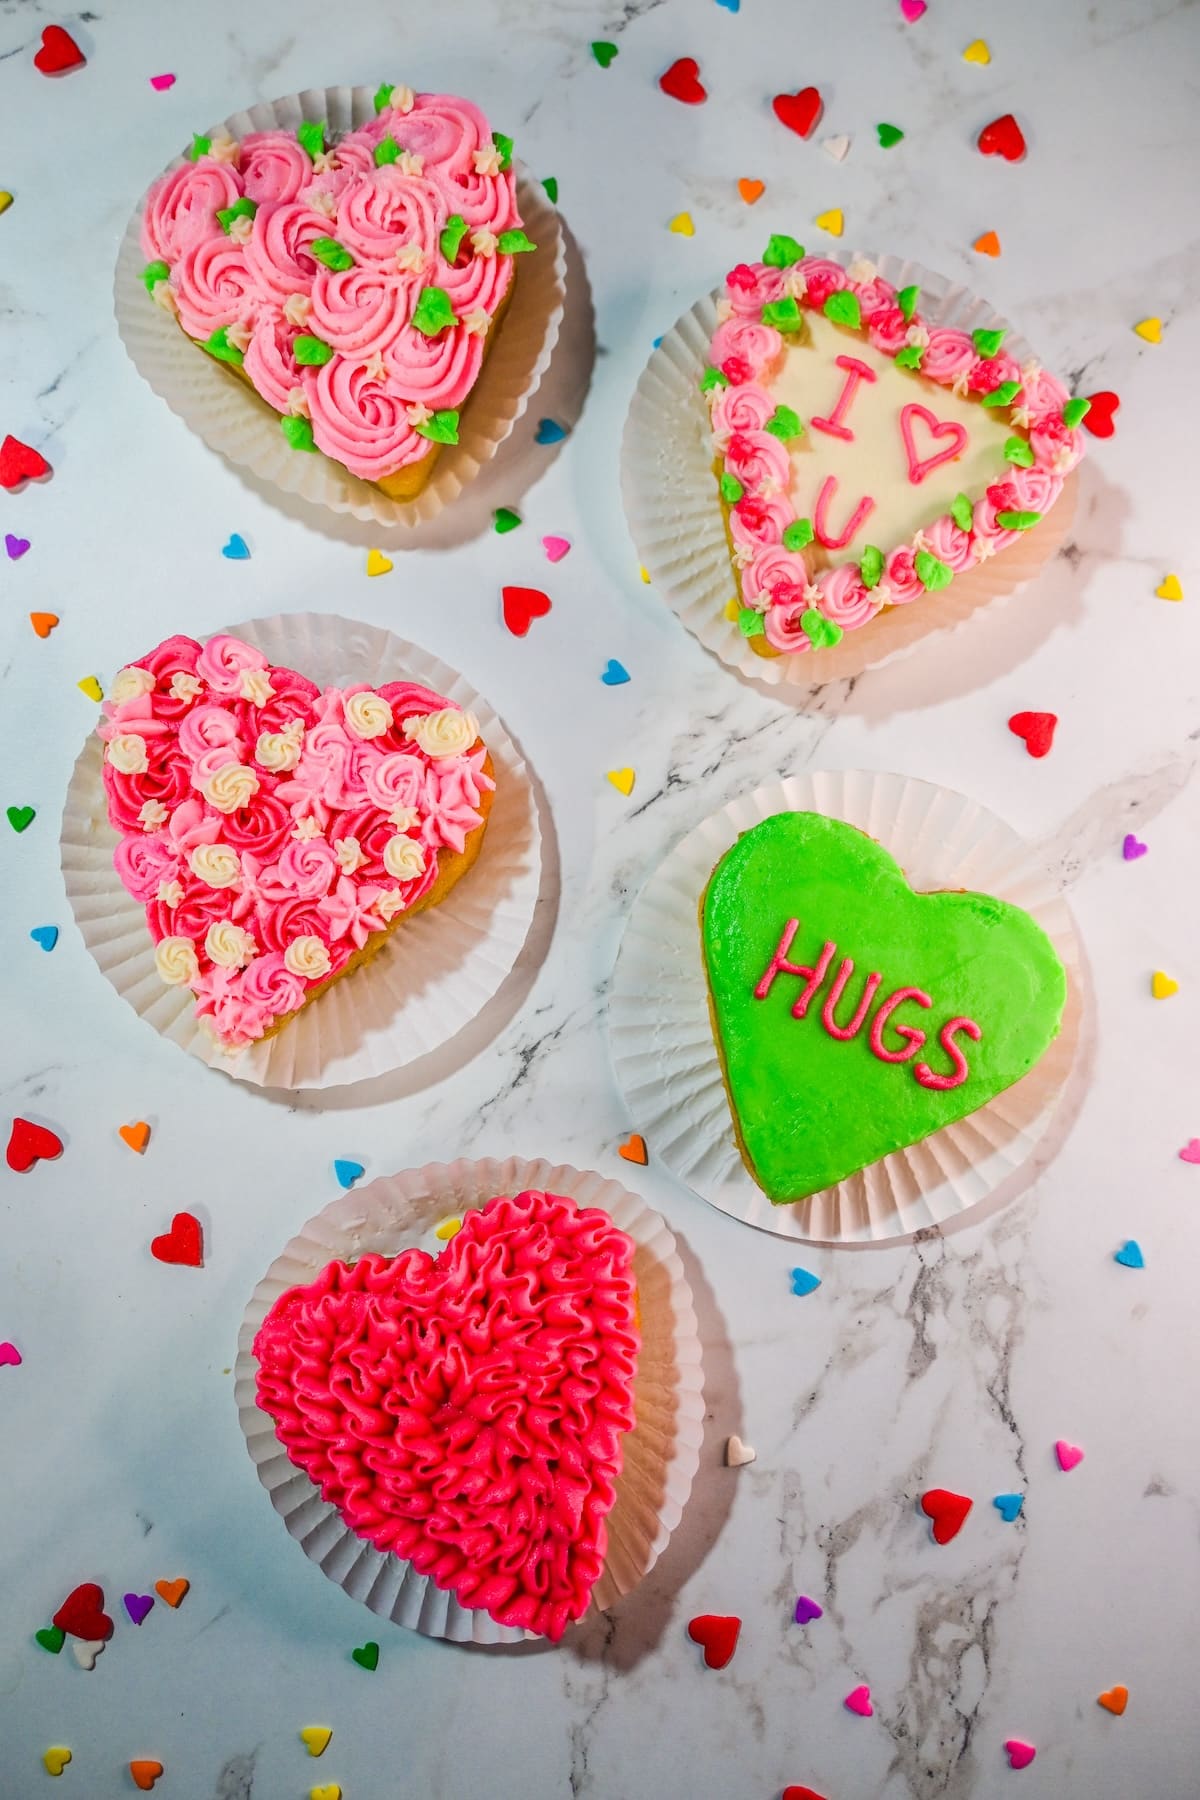 Mini heart cakes decorated with colorful buttercream designs.